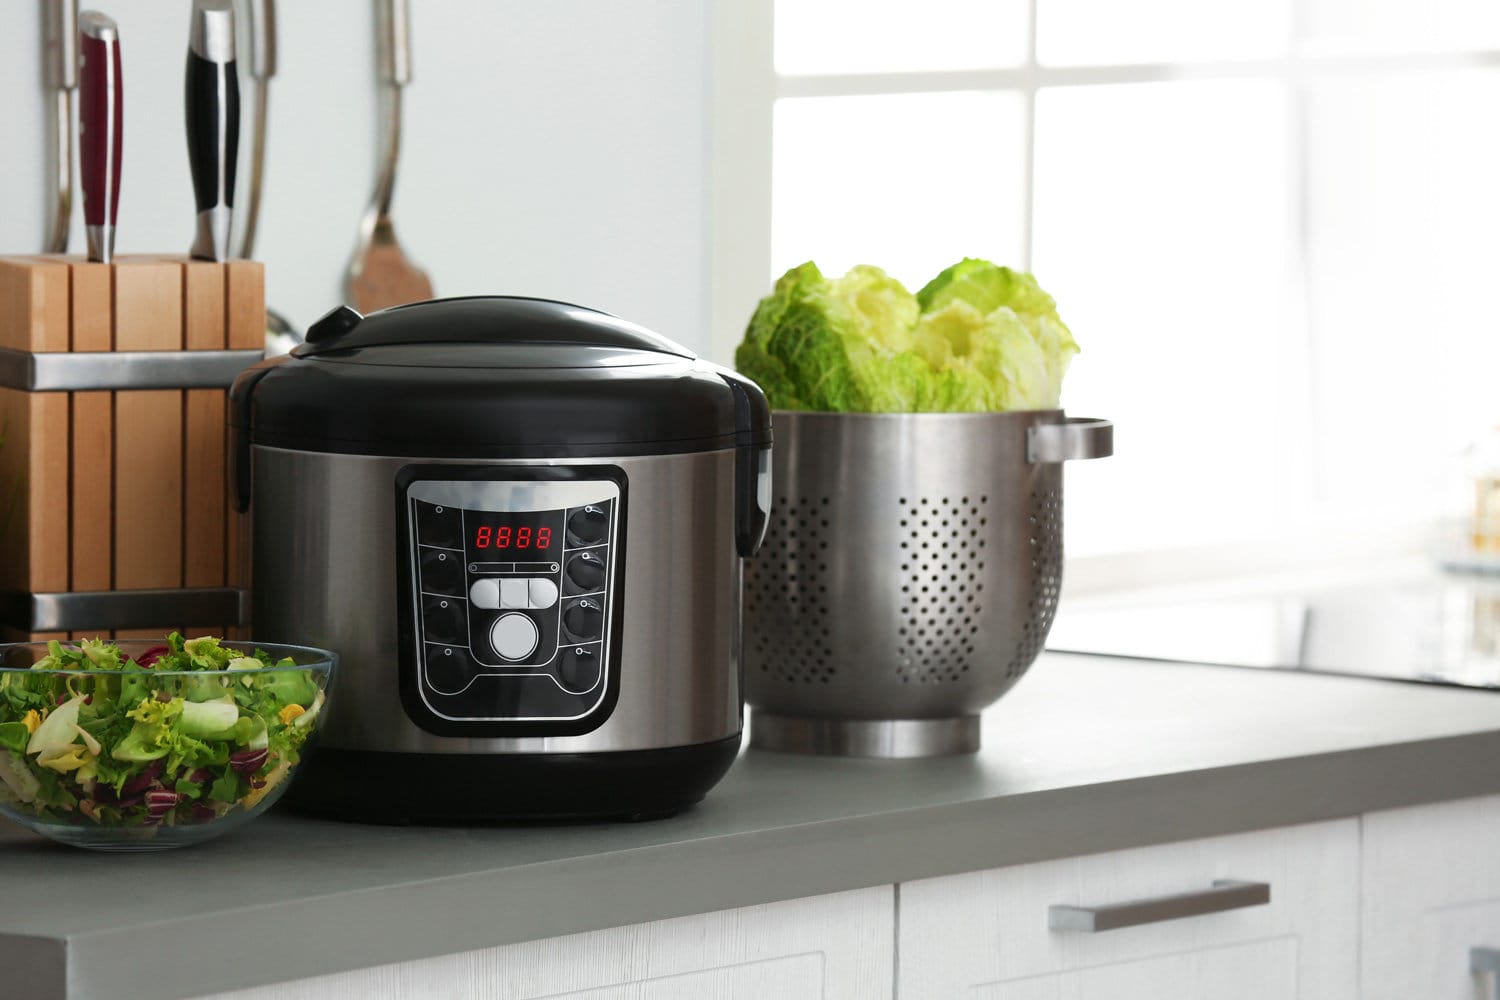 Modern electric multi cooker and food on kitchen countertop